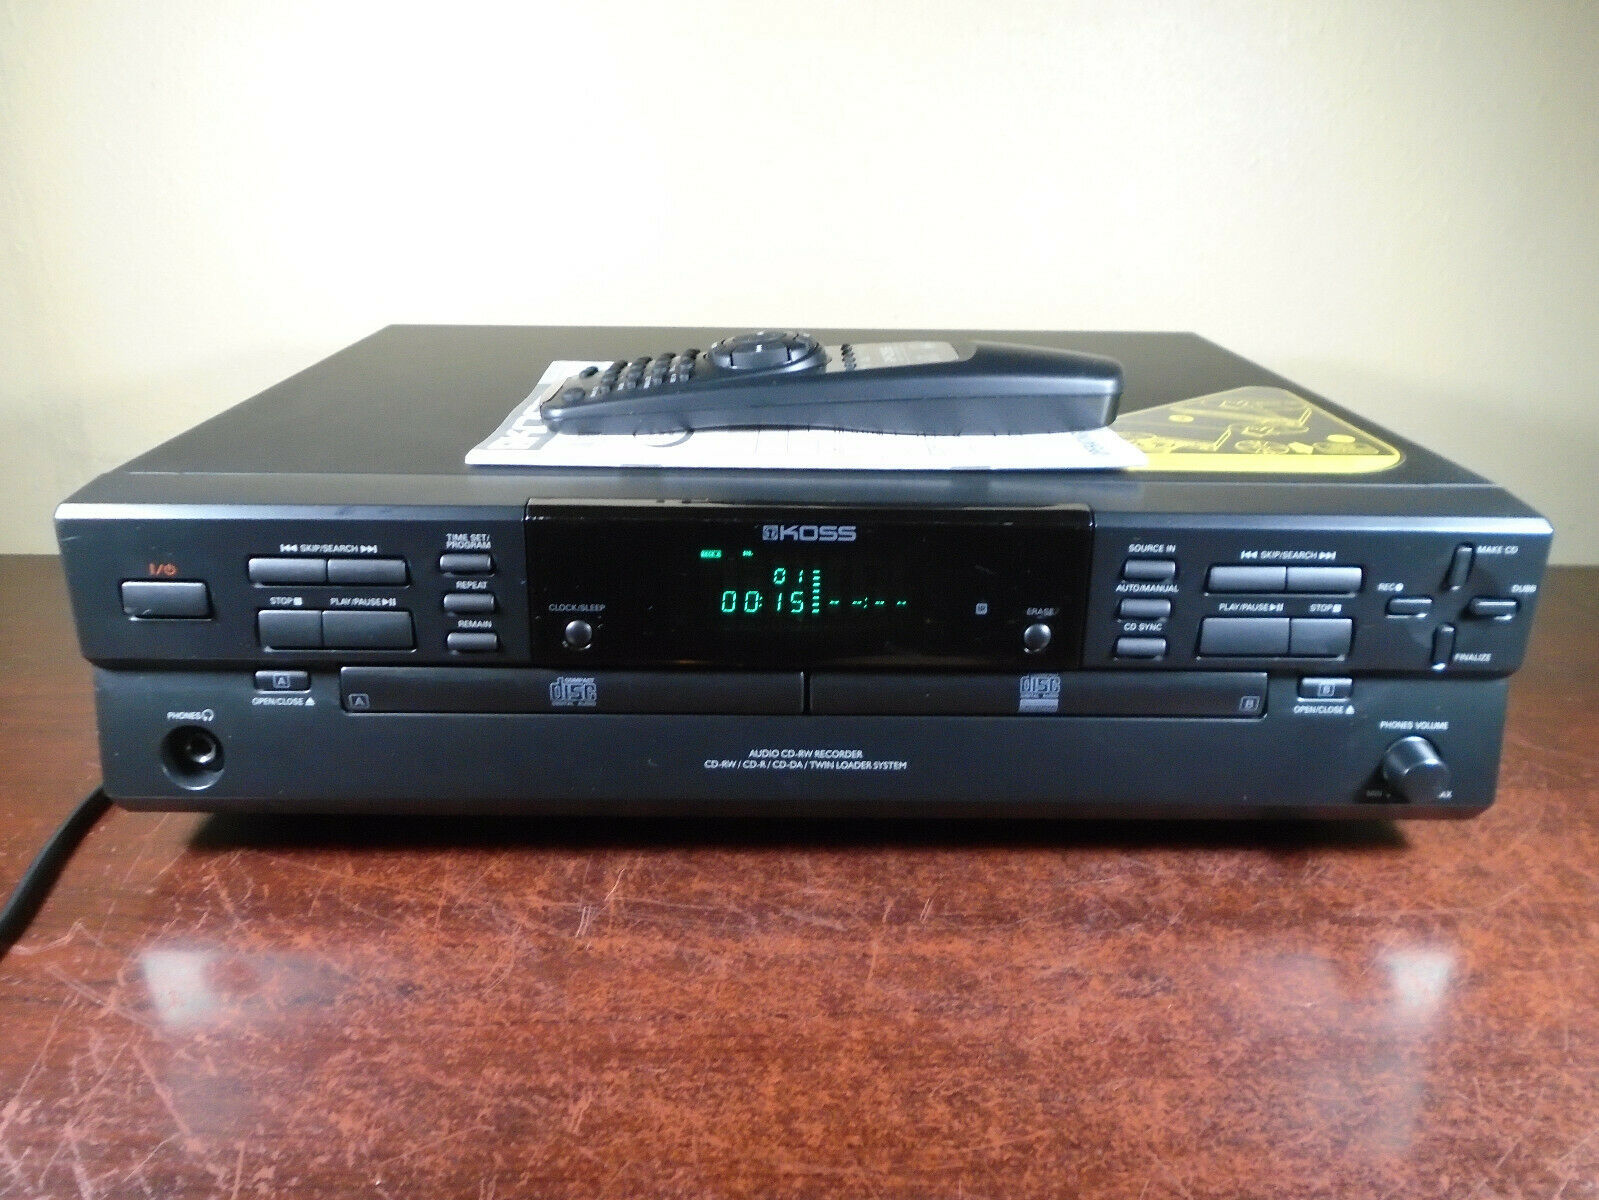 Koss Cdr200 Dual Tray Audio Cd-rw Compact Disc Recorder Player W/remote *works*